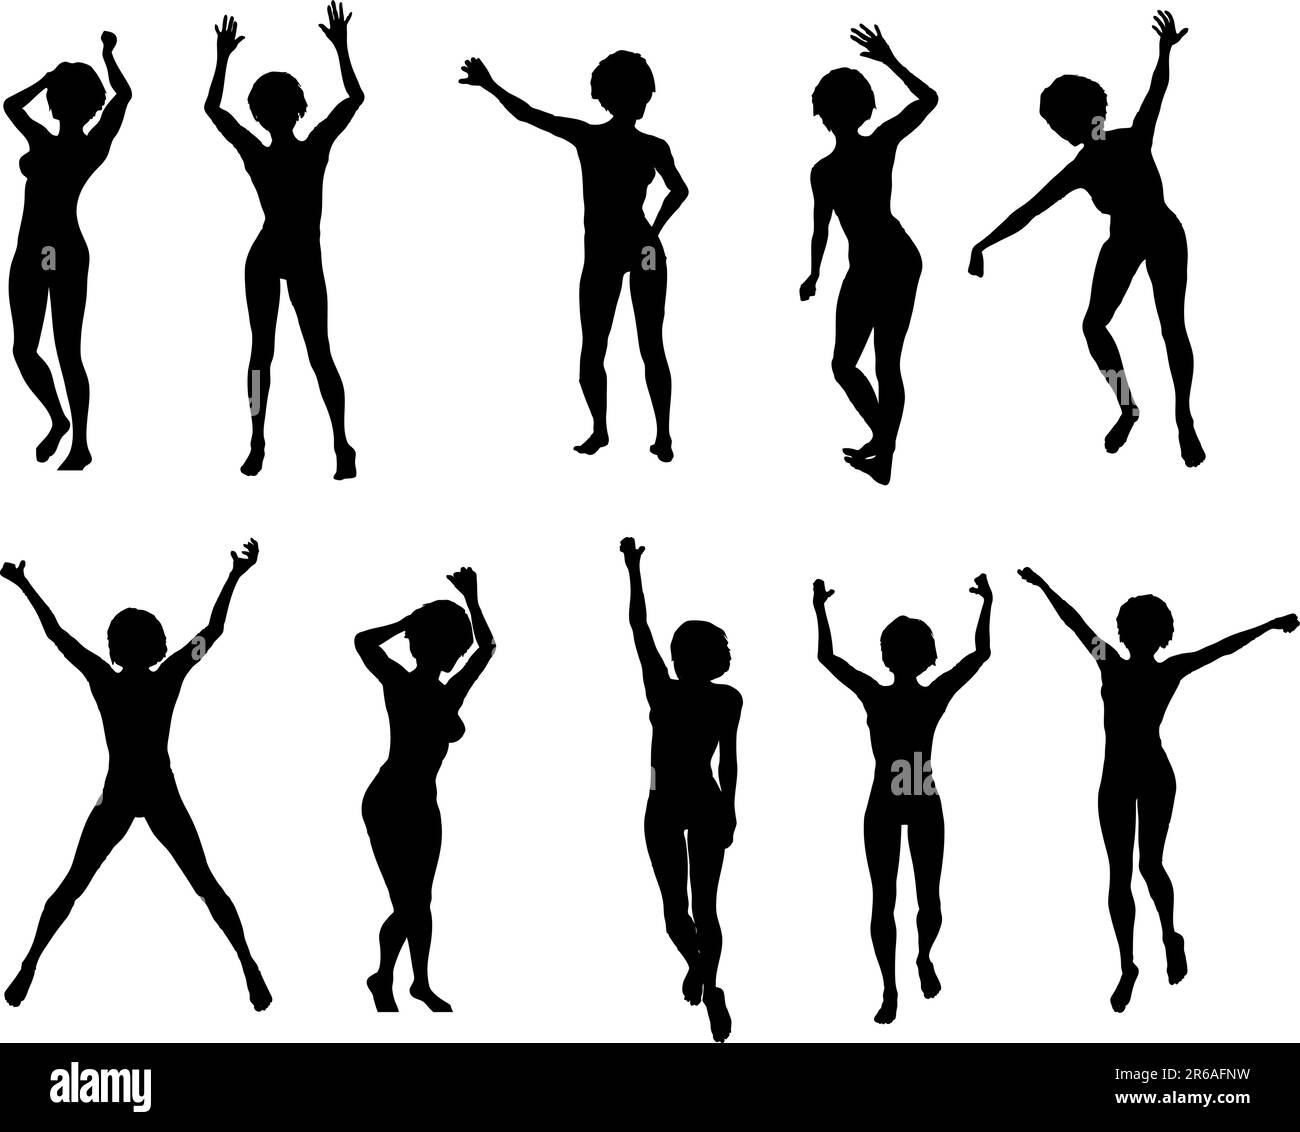 10 female Action Poses in vector format Stock Vector